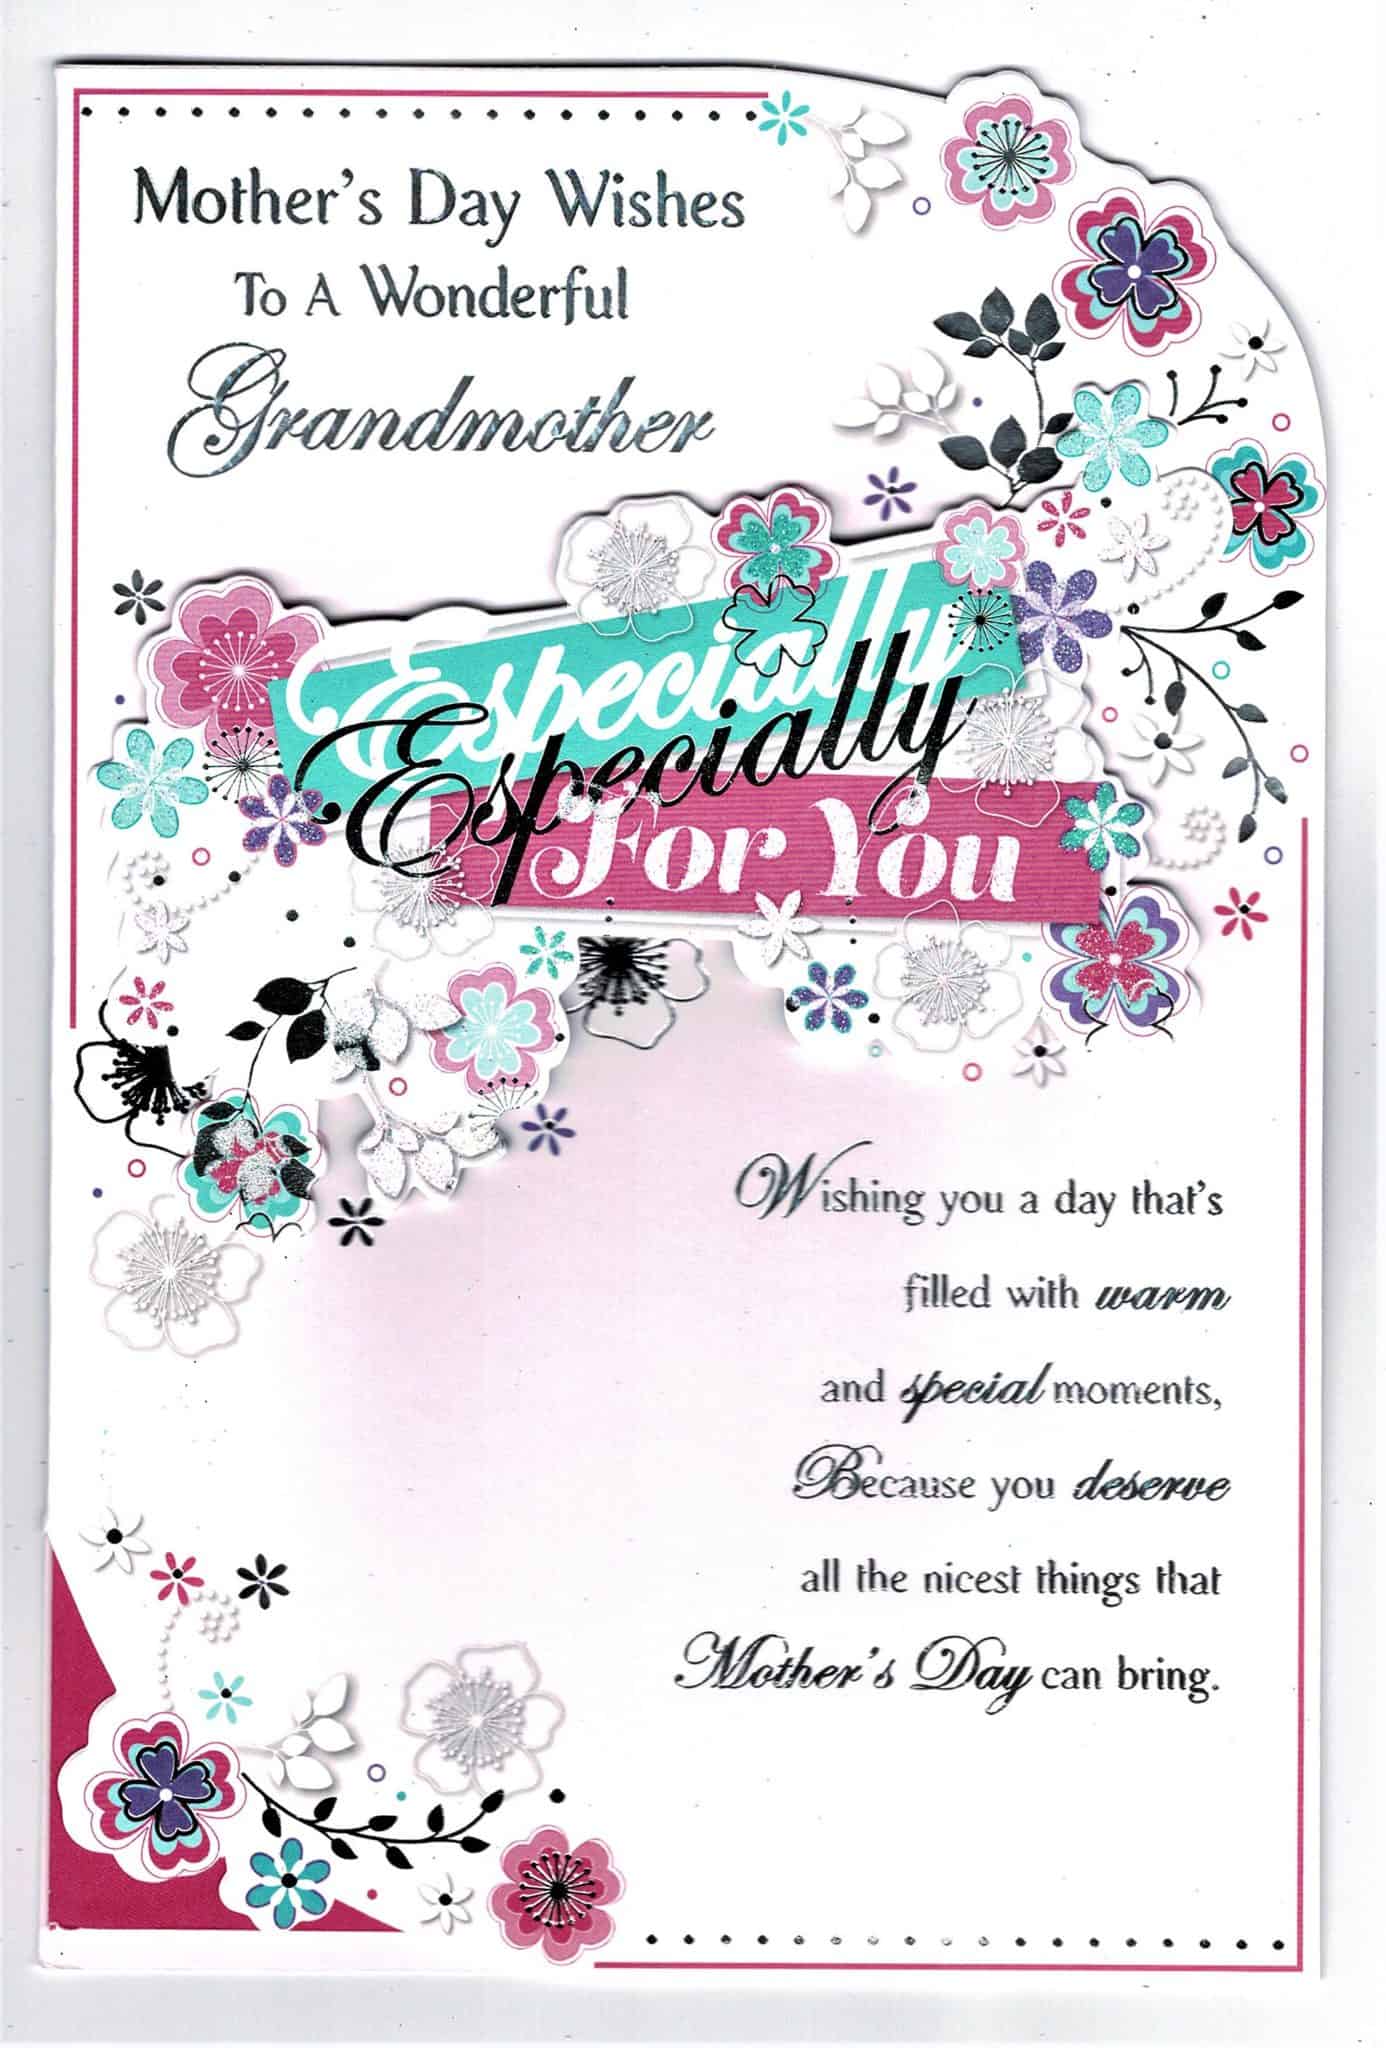 grandmother-mother-s-day-card-mother-s-day-wishes-to-a-wonderful